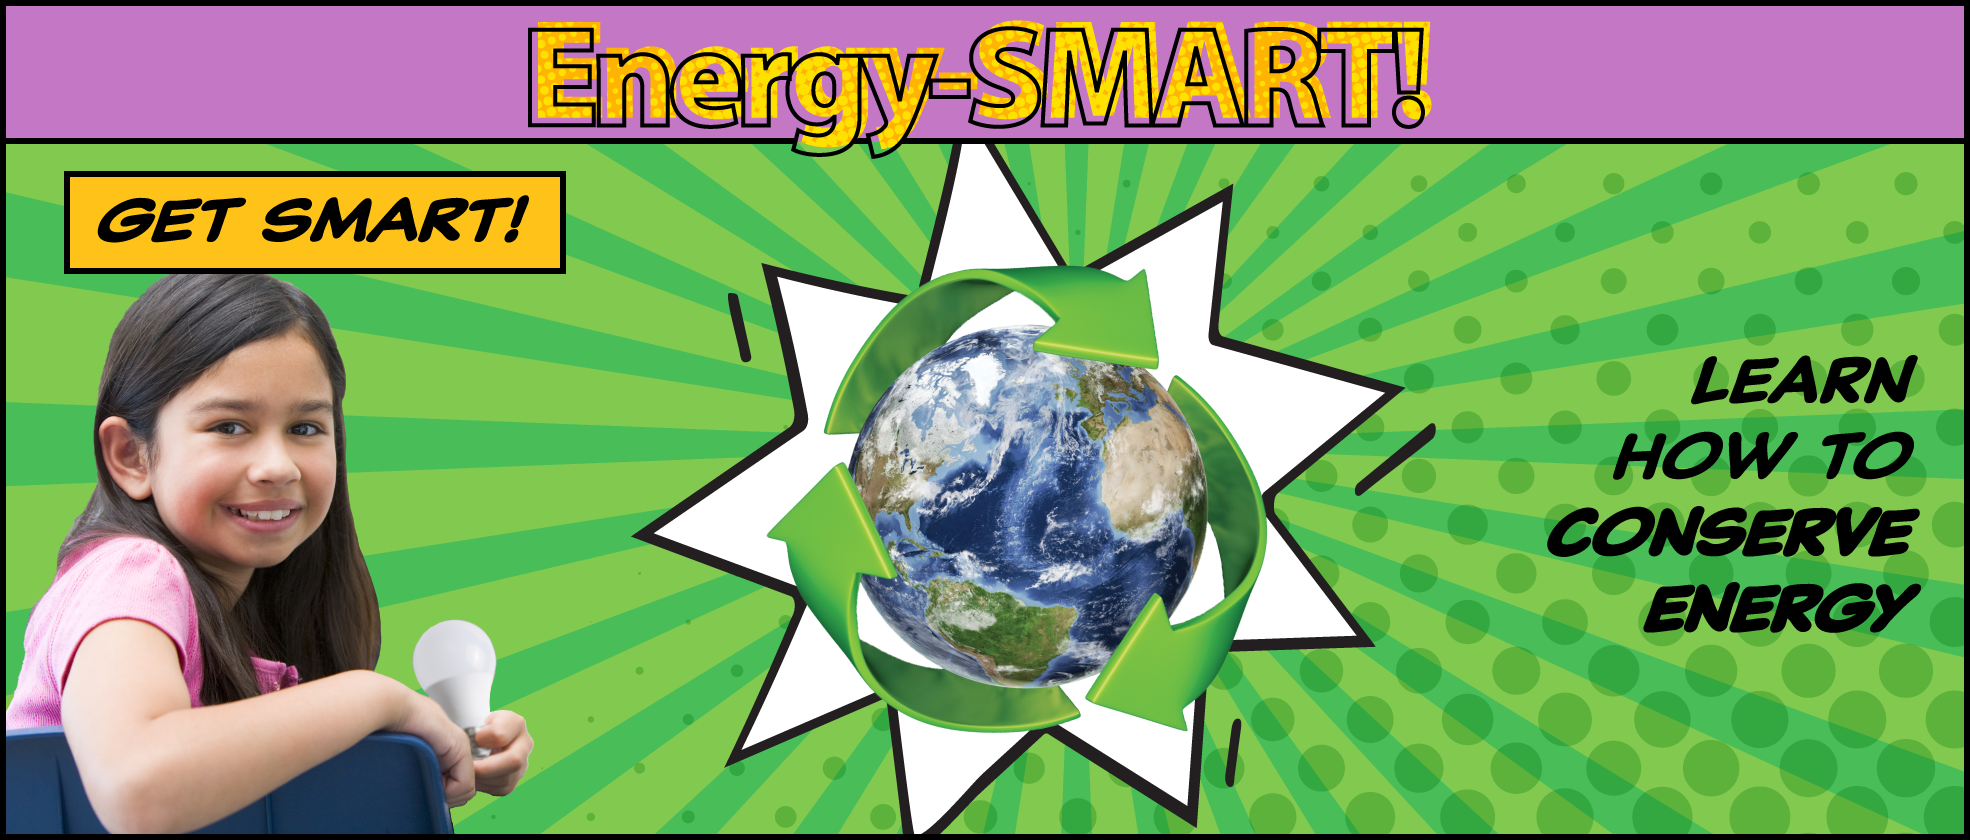 Energy-SMART: Get SMART! Learn how to conserve energy